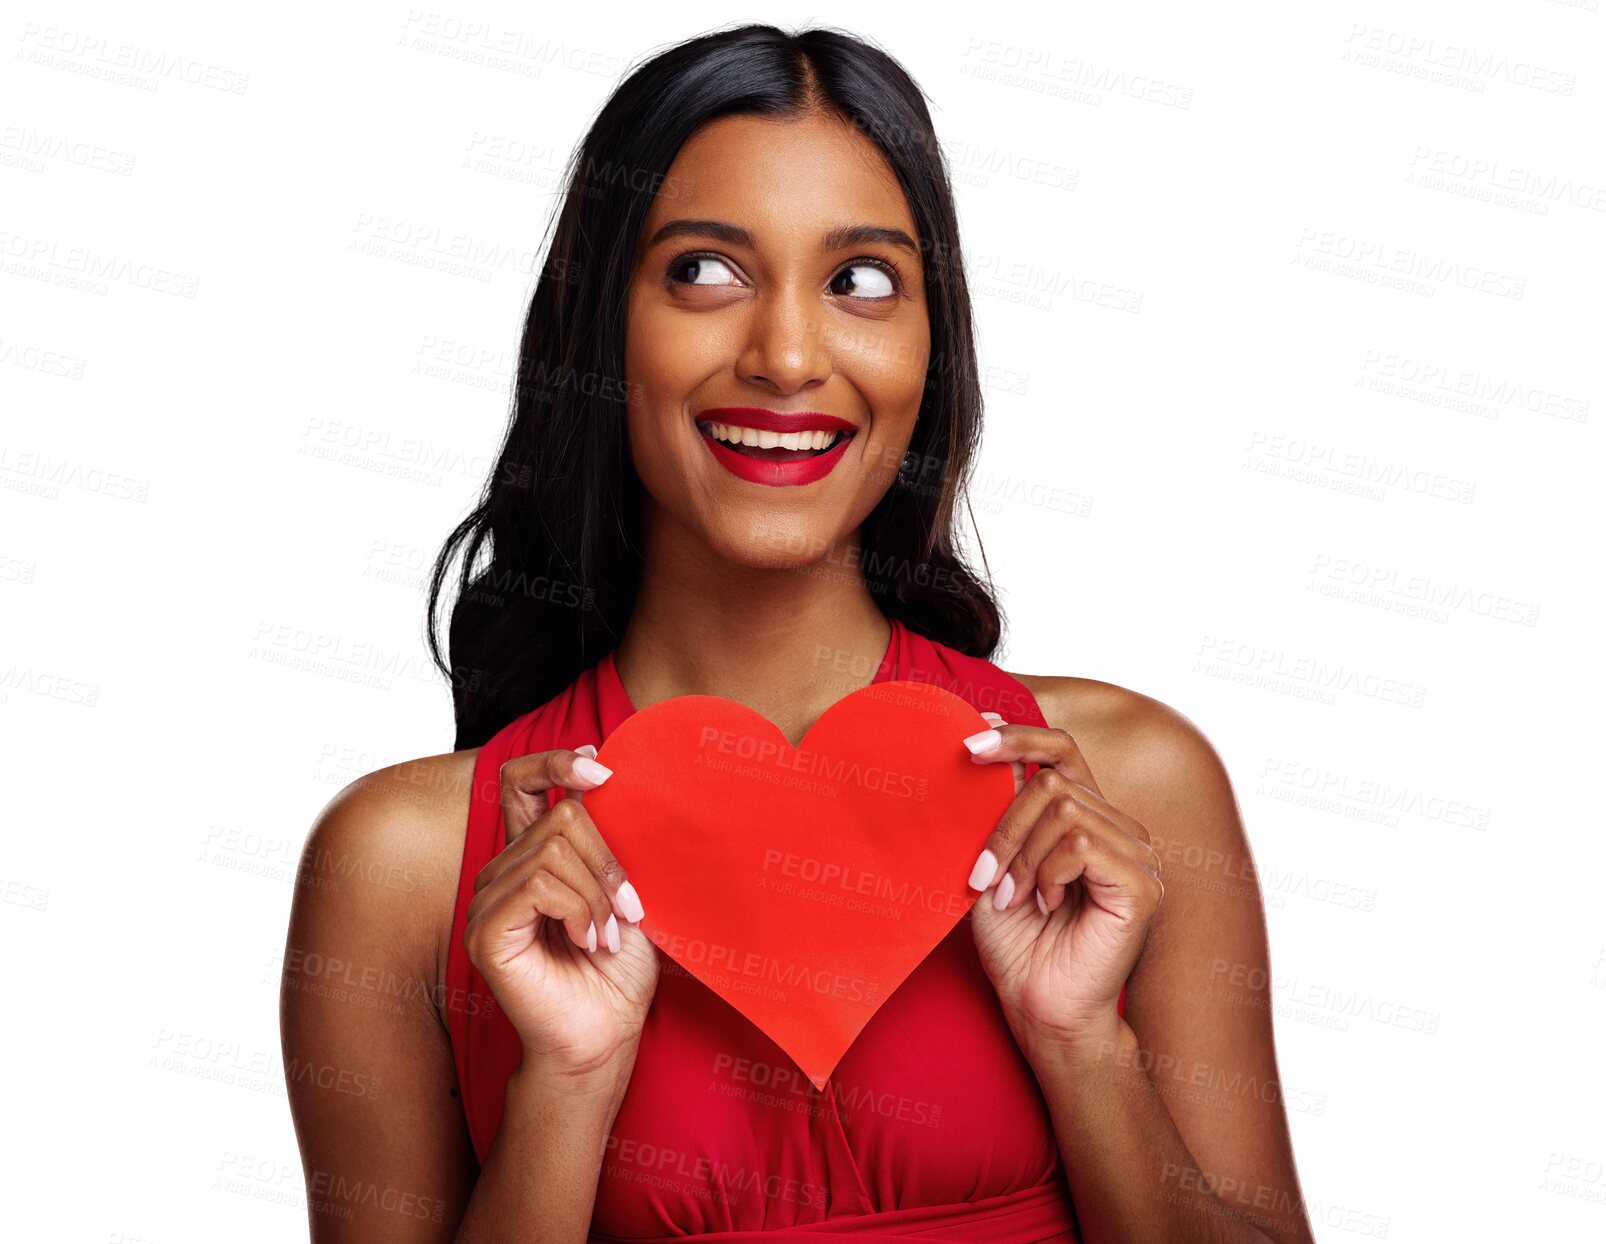 Buy stock photo Thinking, heart and woman with card on valentines day isolated on png transparent background for love. Red lips, emoji and happy young female holding a shape or symbol of affection, care or ideas